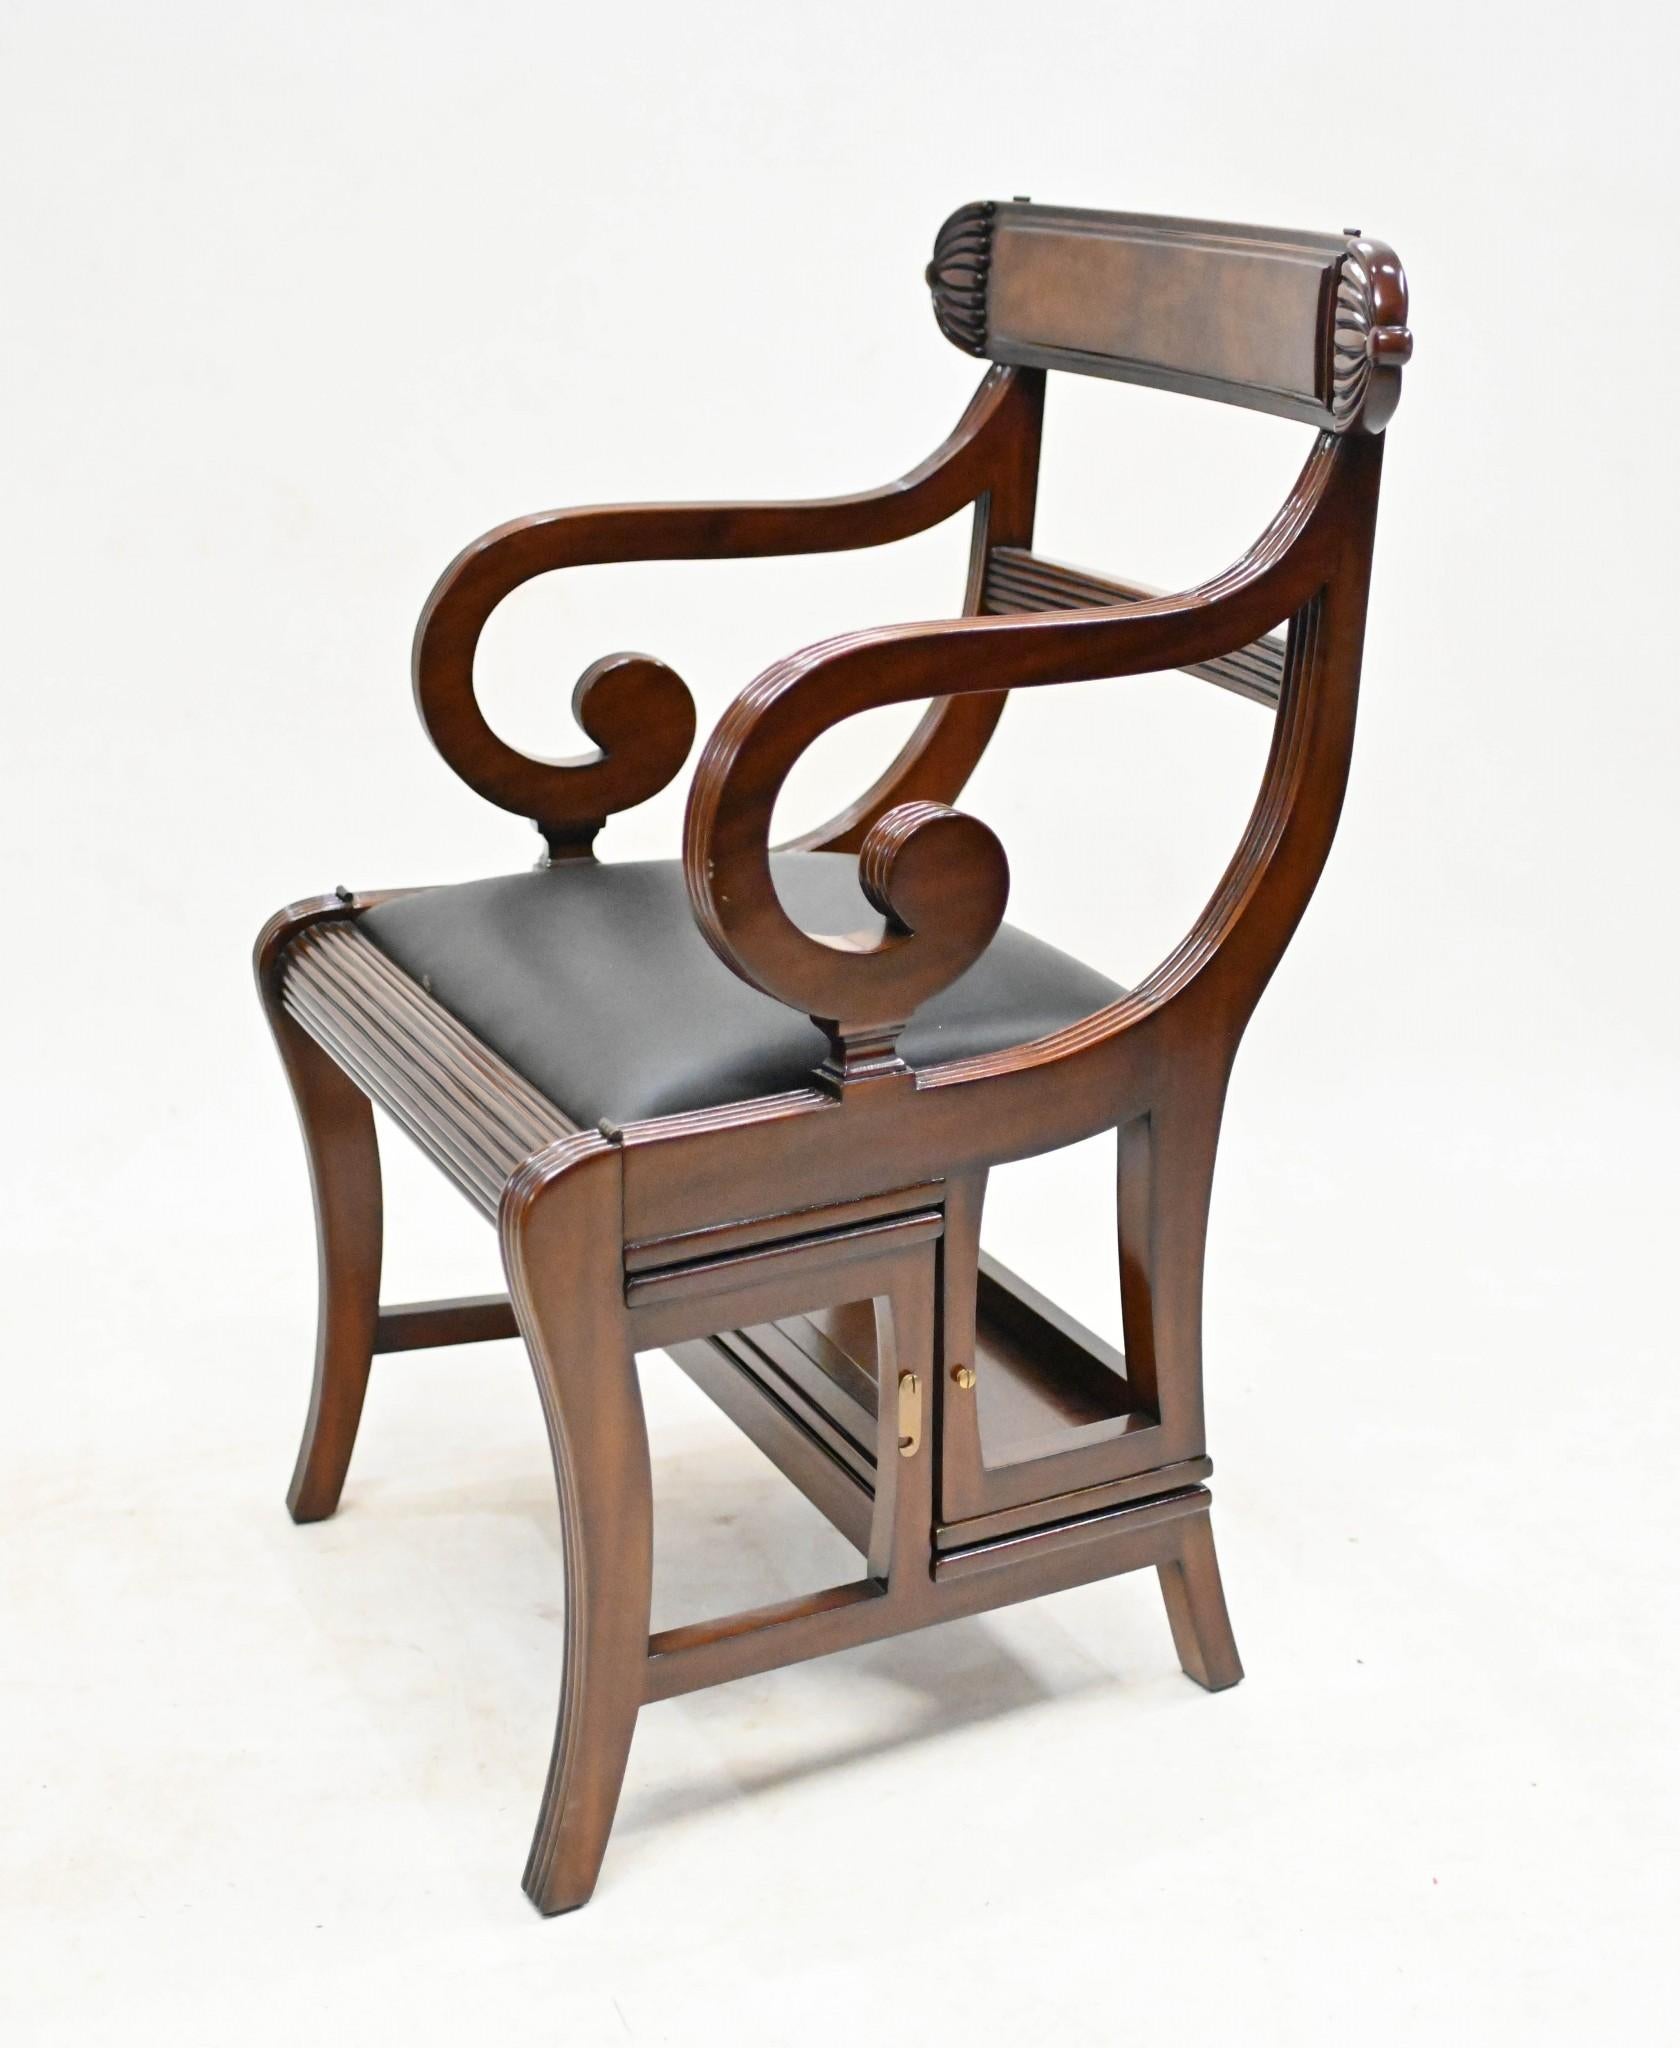 Absolutely unique Regency style arm chair library step combo - a metamorphic chair
Wow - have you seen any thing like this?
Great space saving piece with double purpose
Perfect for the home library or just if you want a device to reach higher for